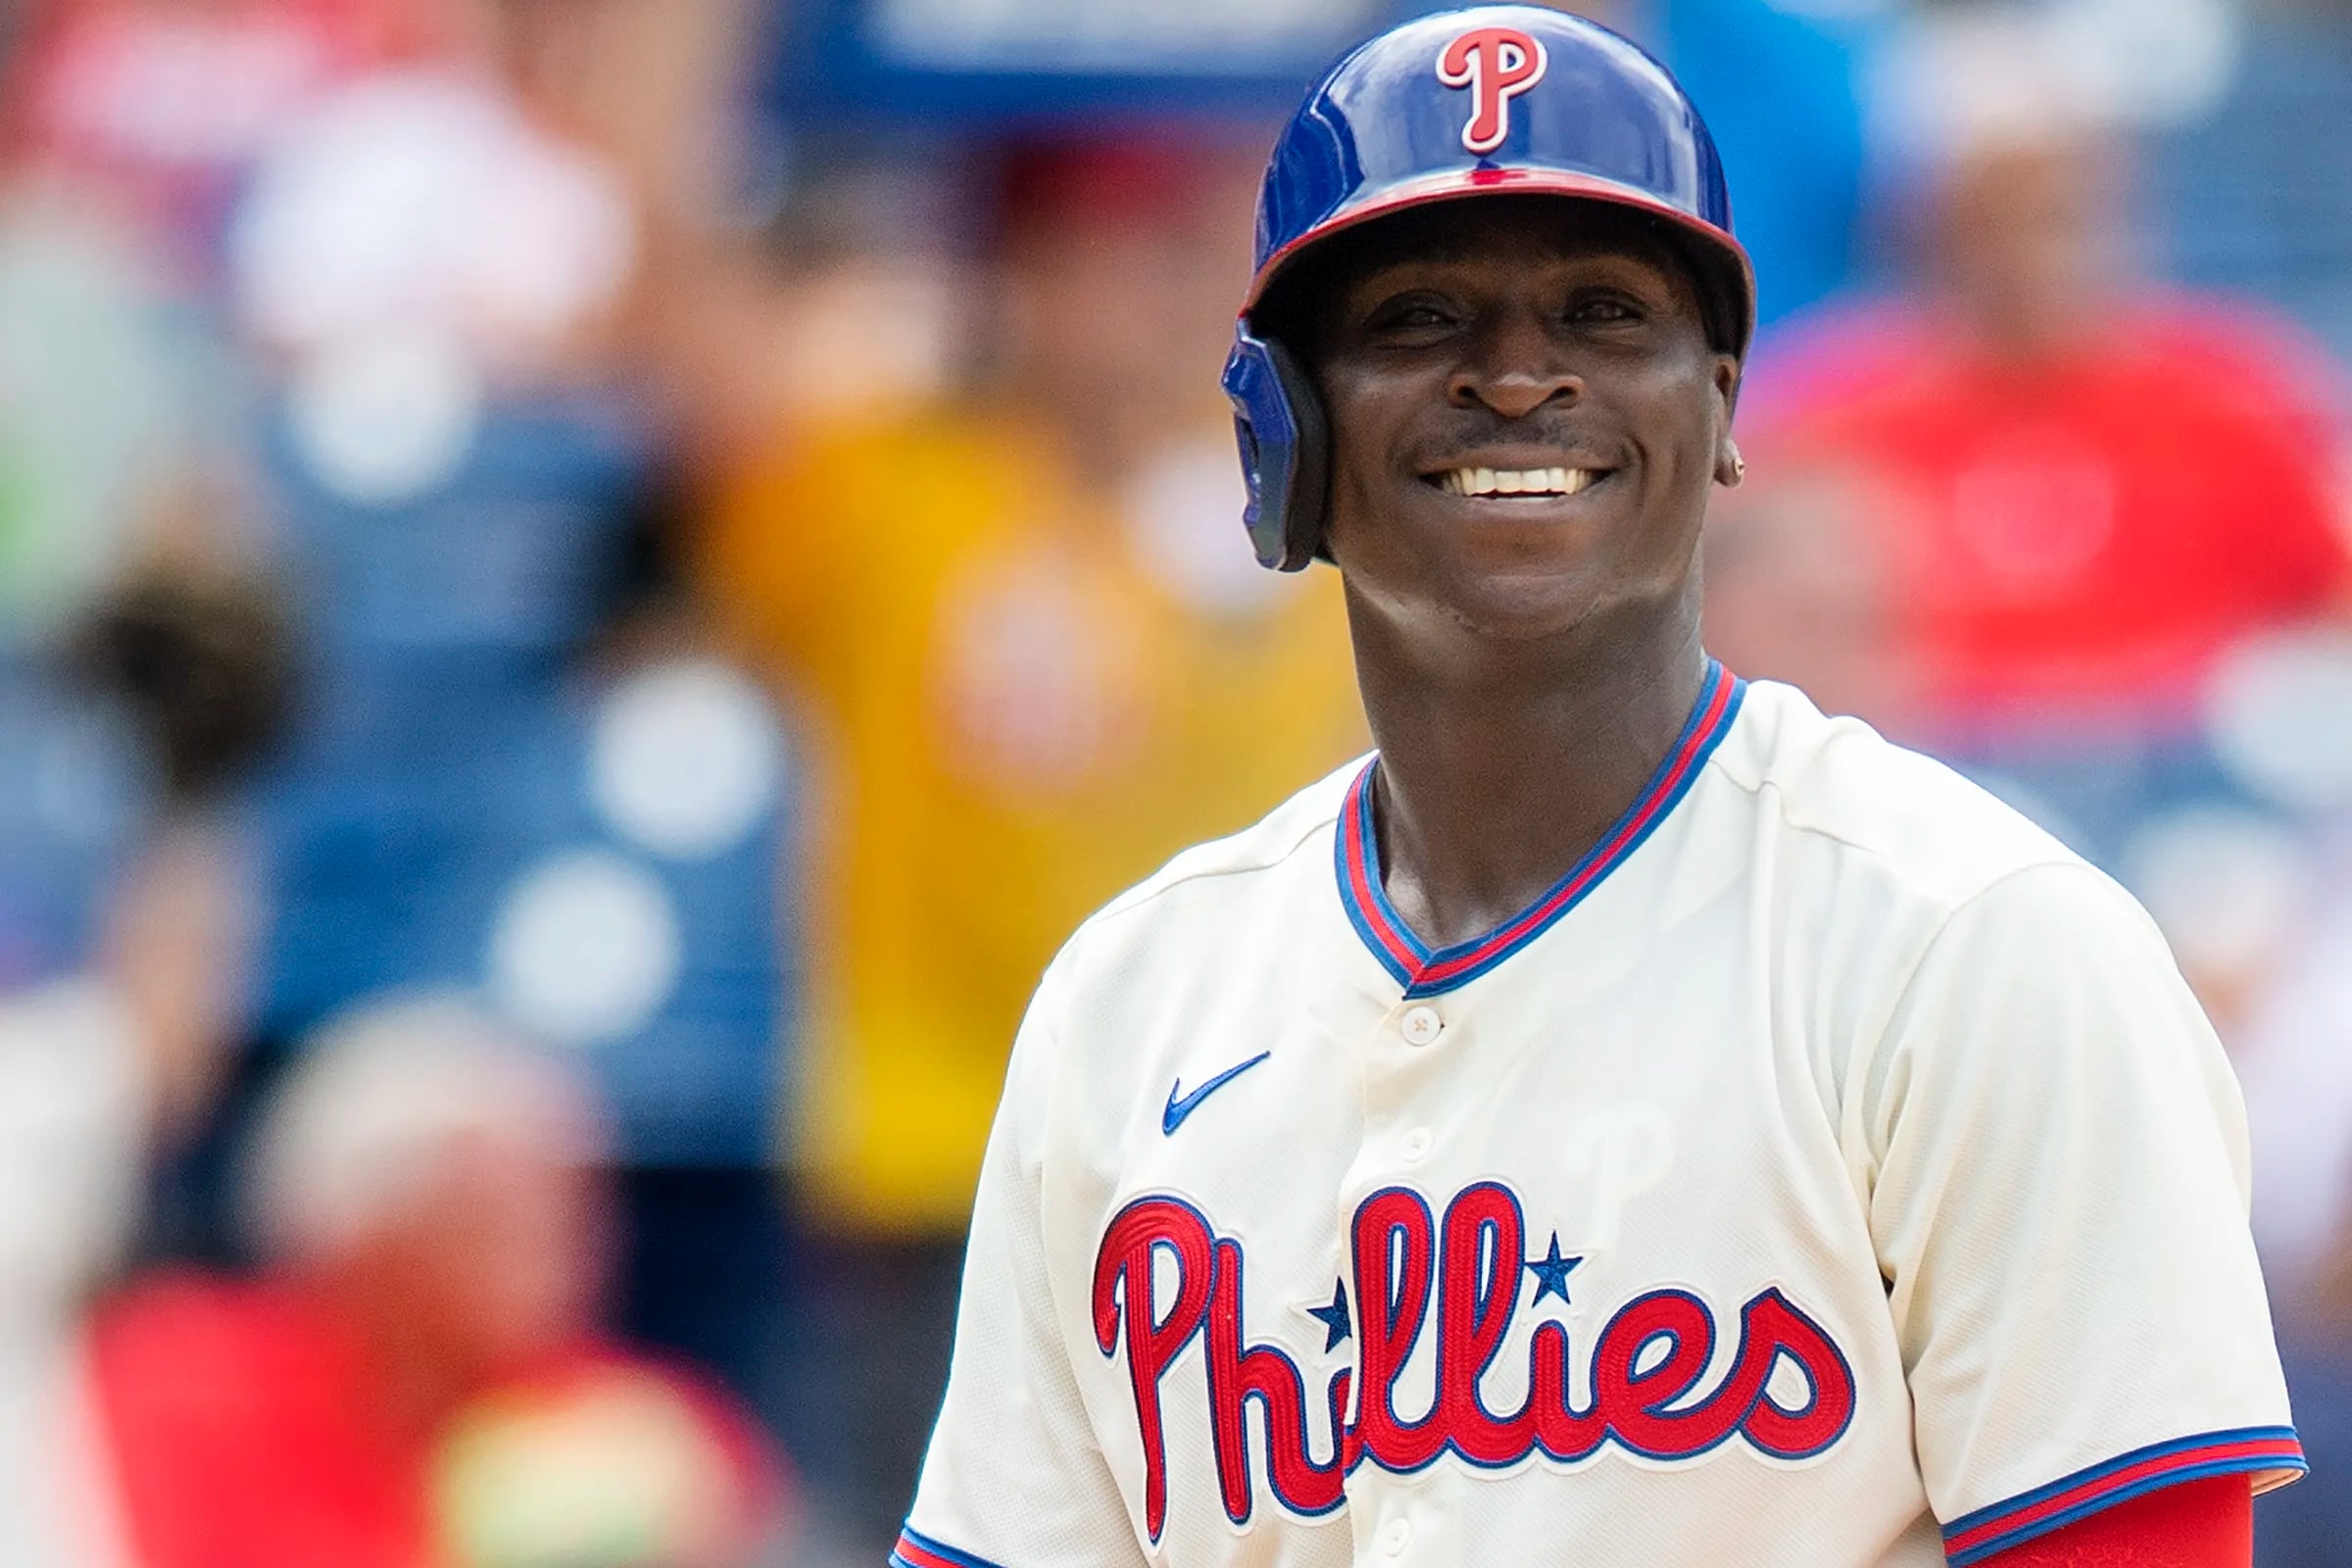 Phillies agree to 1-year deal with SS Didi Gregorius, source says - ESPN